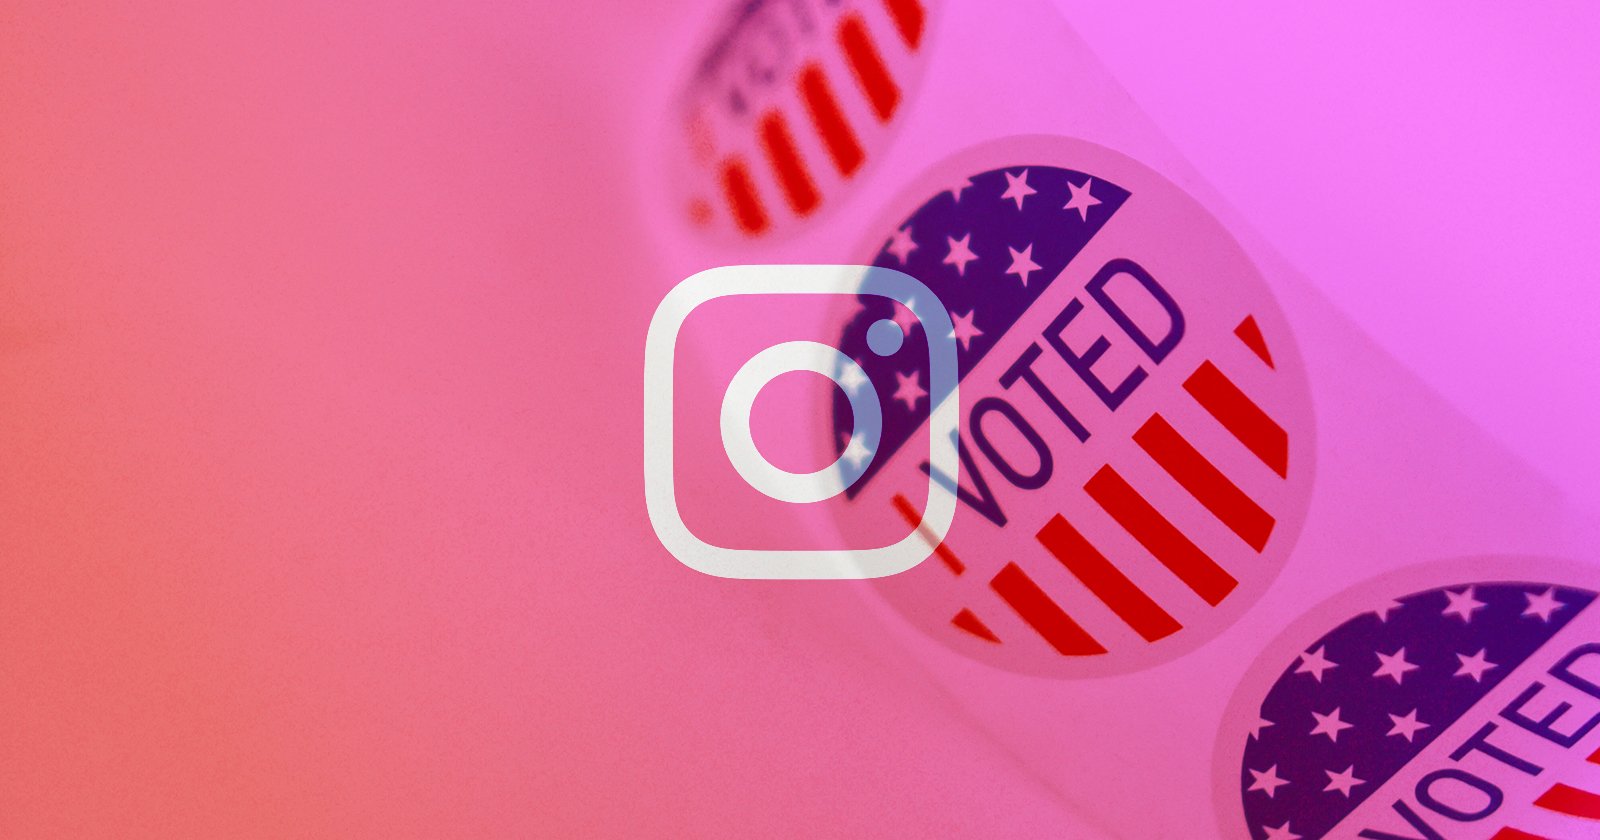 Instagram Temporarily Blocks Recent Hashtags Ahead of US Election